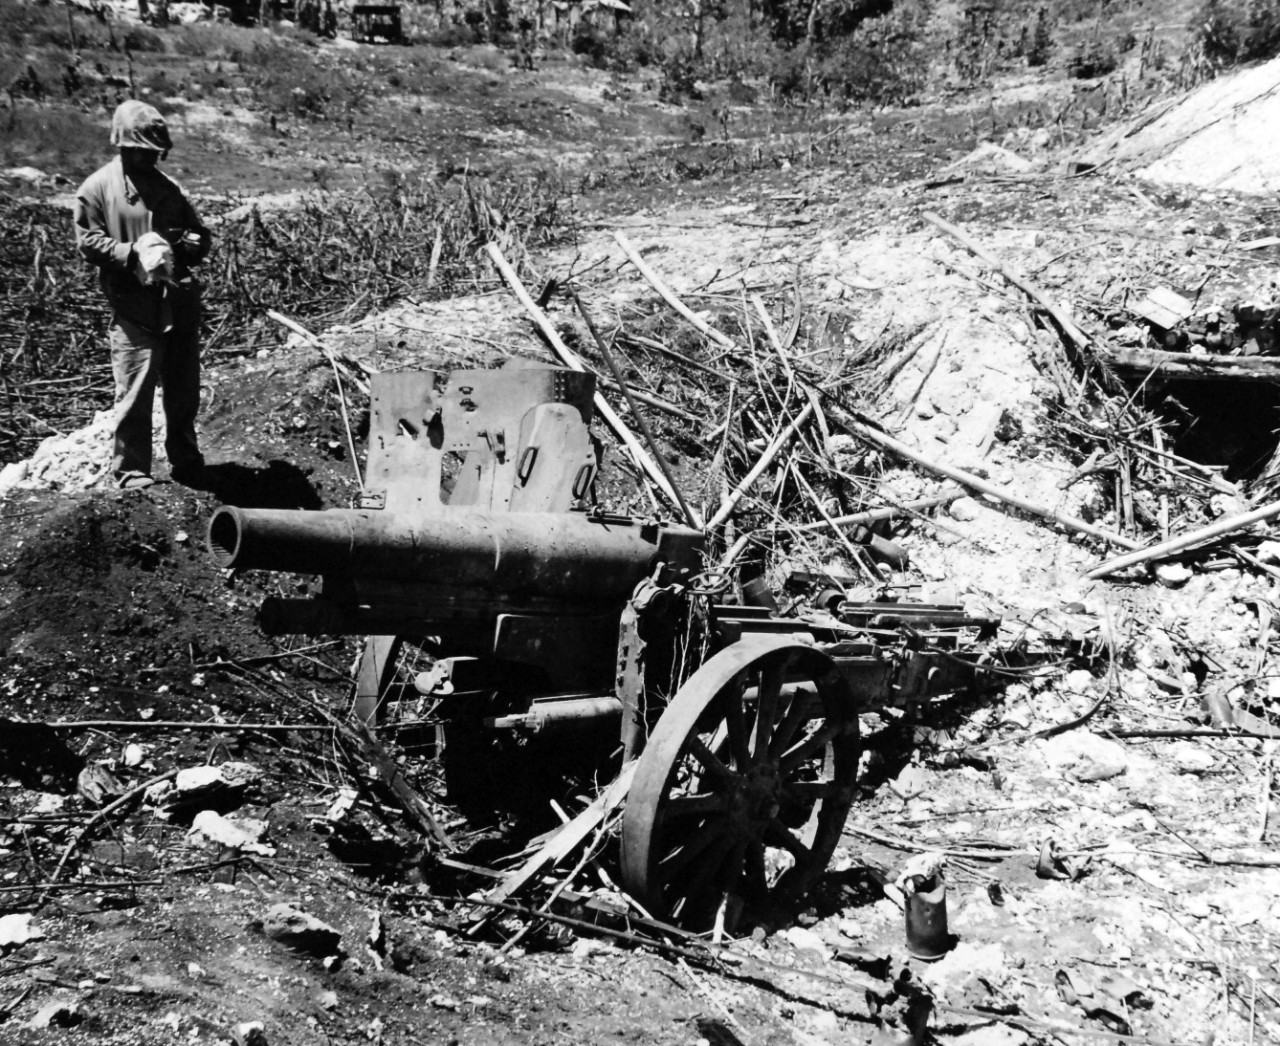 80-G-307744:  Invasion of Saipan, June-July 1944.  Japanese guns captured on Saipan after invasion.  Shown: Howitzer.  Photograph received March 20, 1945.      Official U.S. Navy Photograph, now in the collections of the U.S. Navy.  (2017/04/11).  